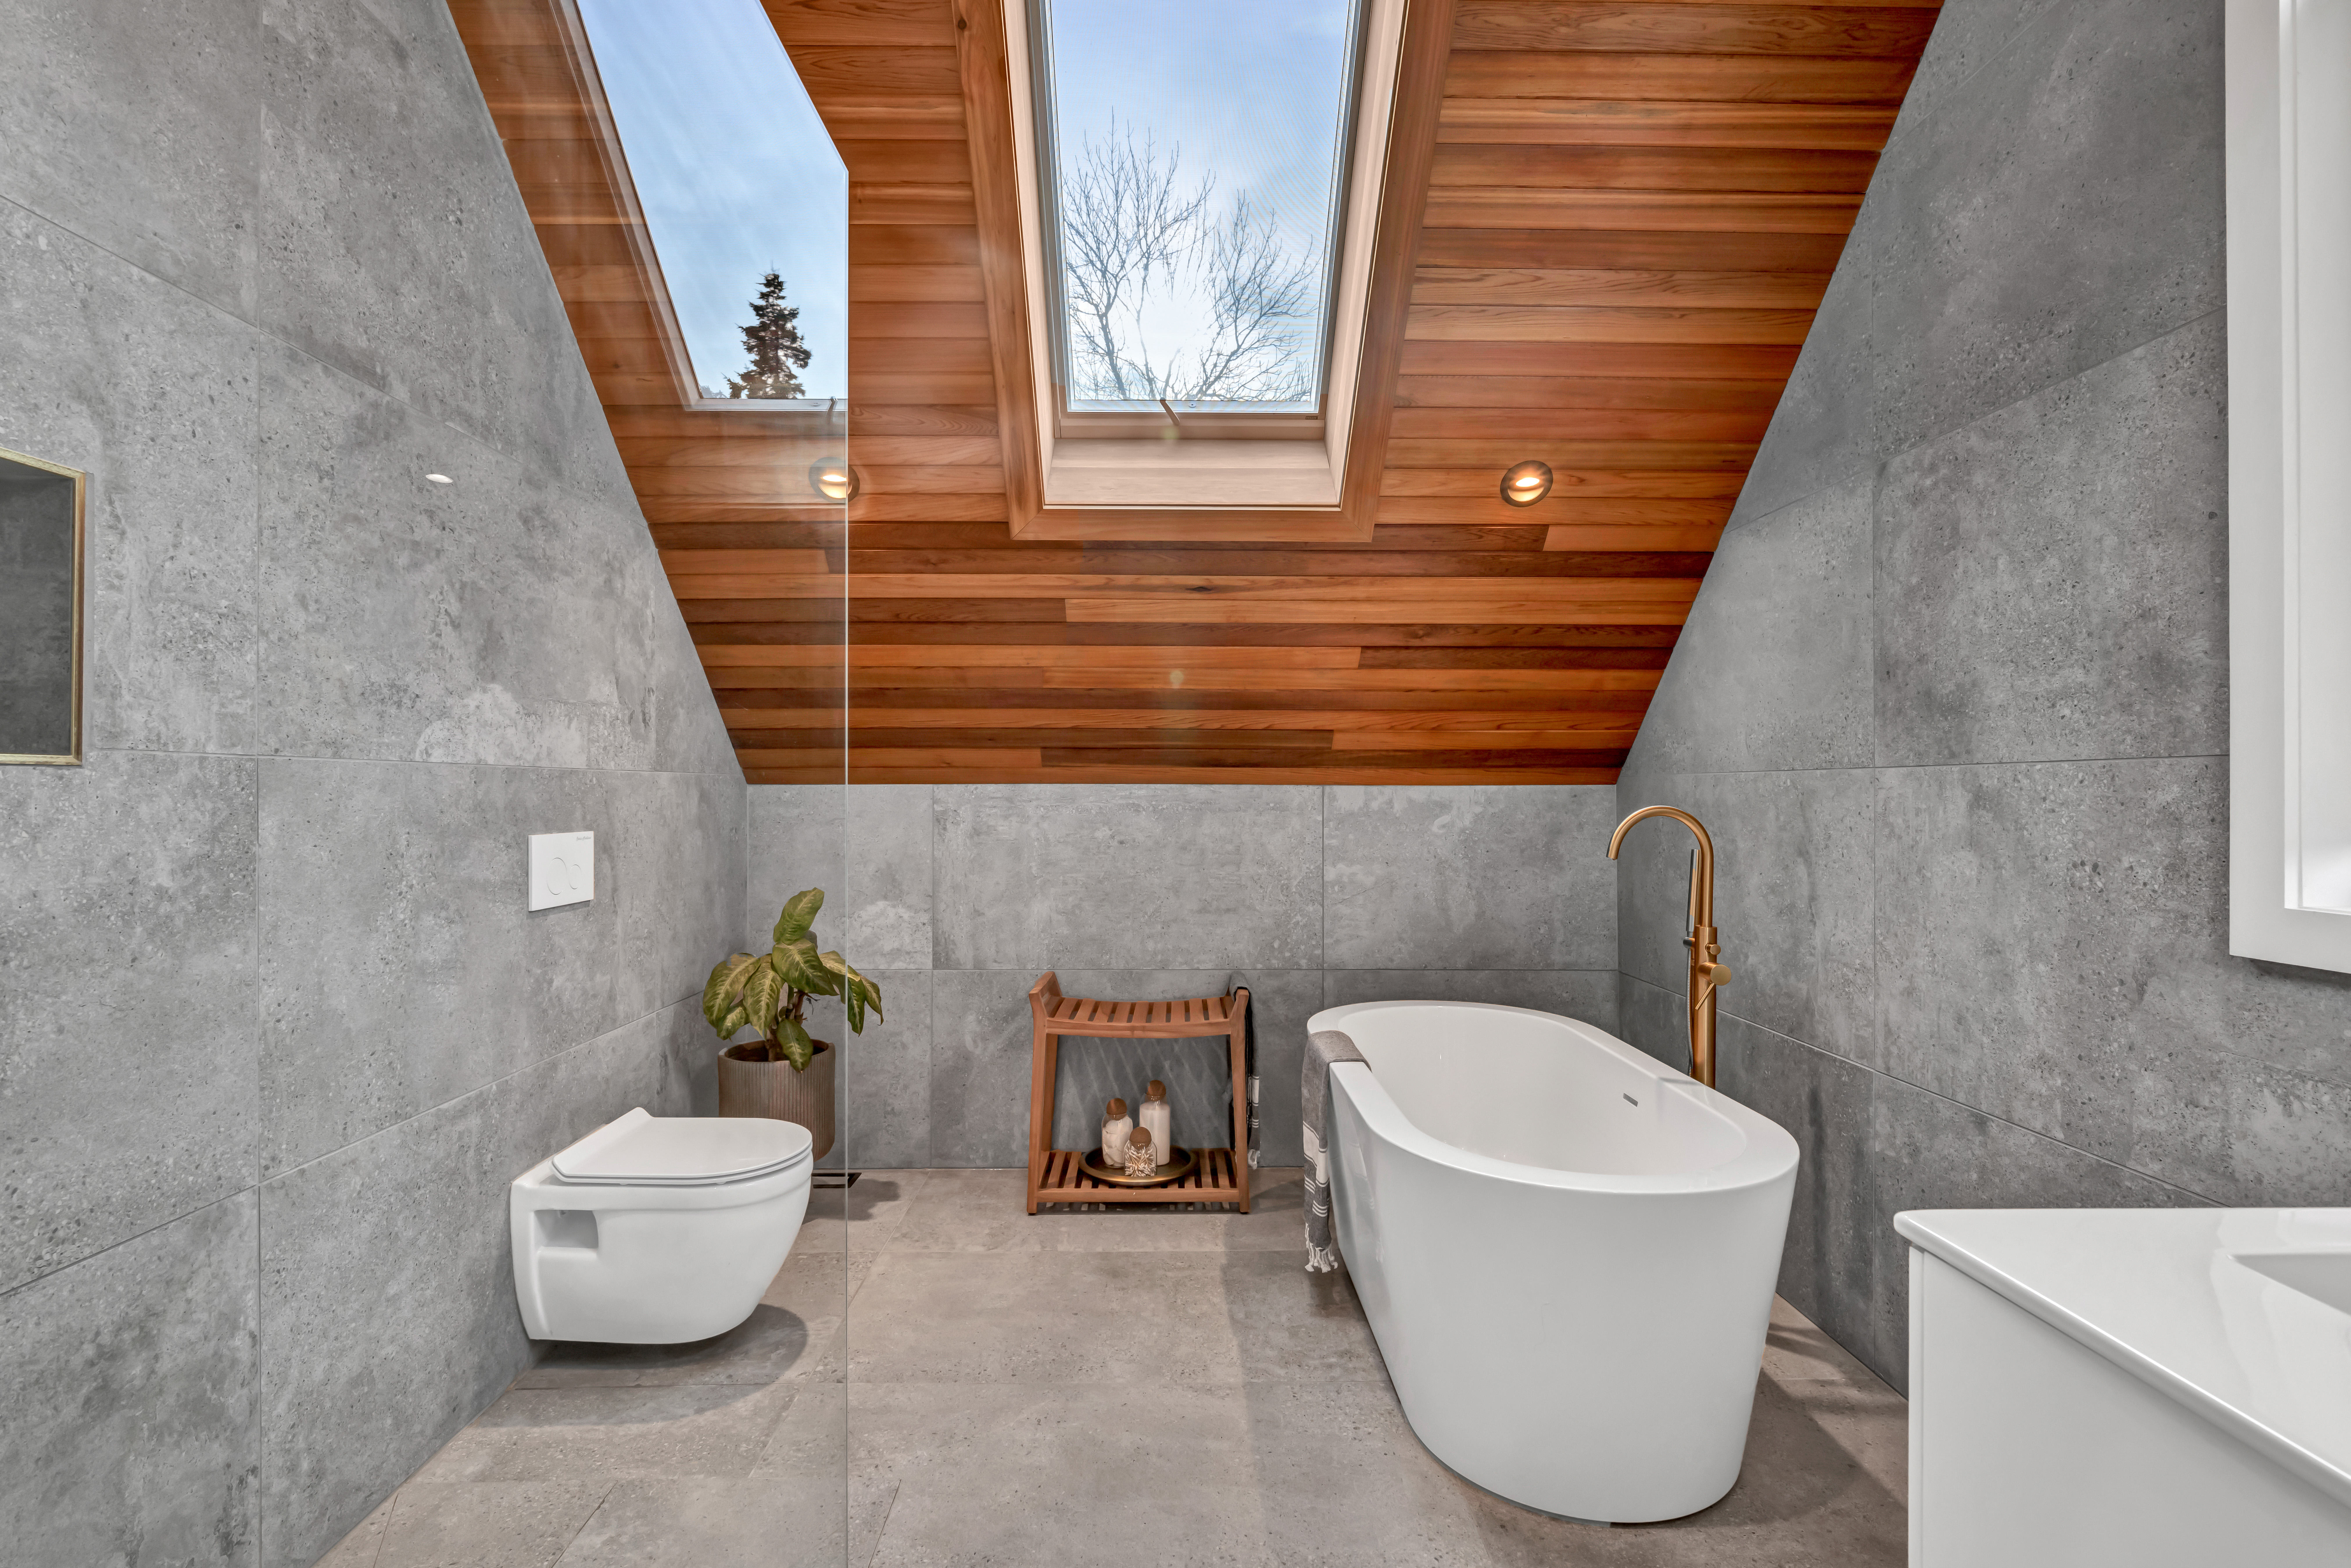 A bright bathroom with a soaker tub, a toilet, and a wood-panelled ceiling with a skylight.